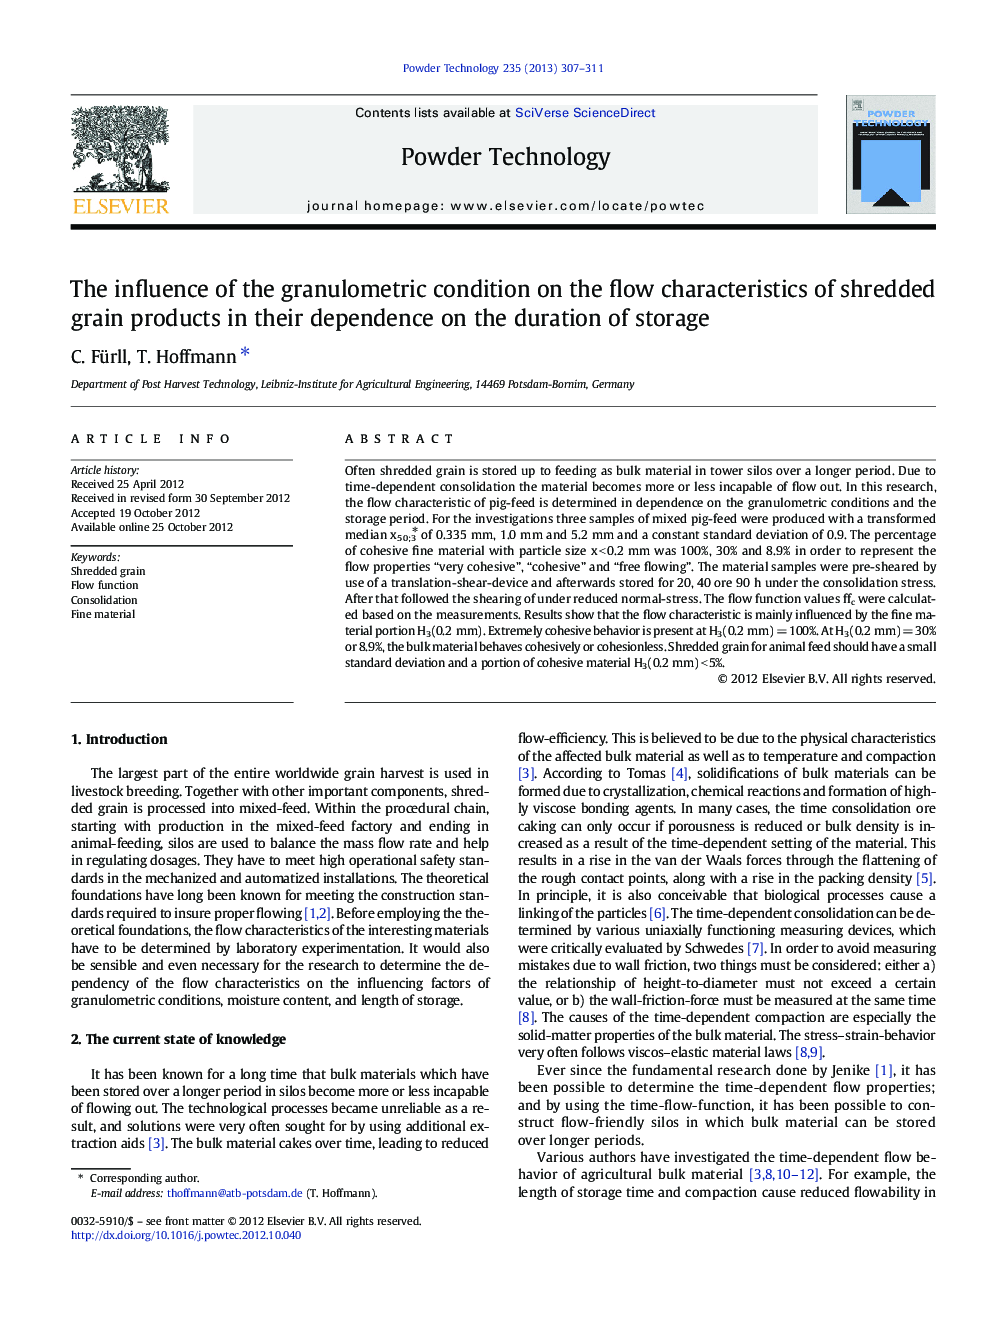 The influence of the granulometric condition on the flow characteristics of shredded grain products in their dependence on the duration of storage